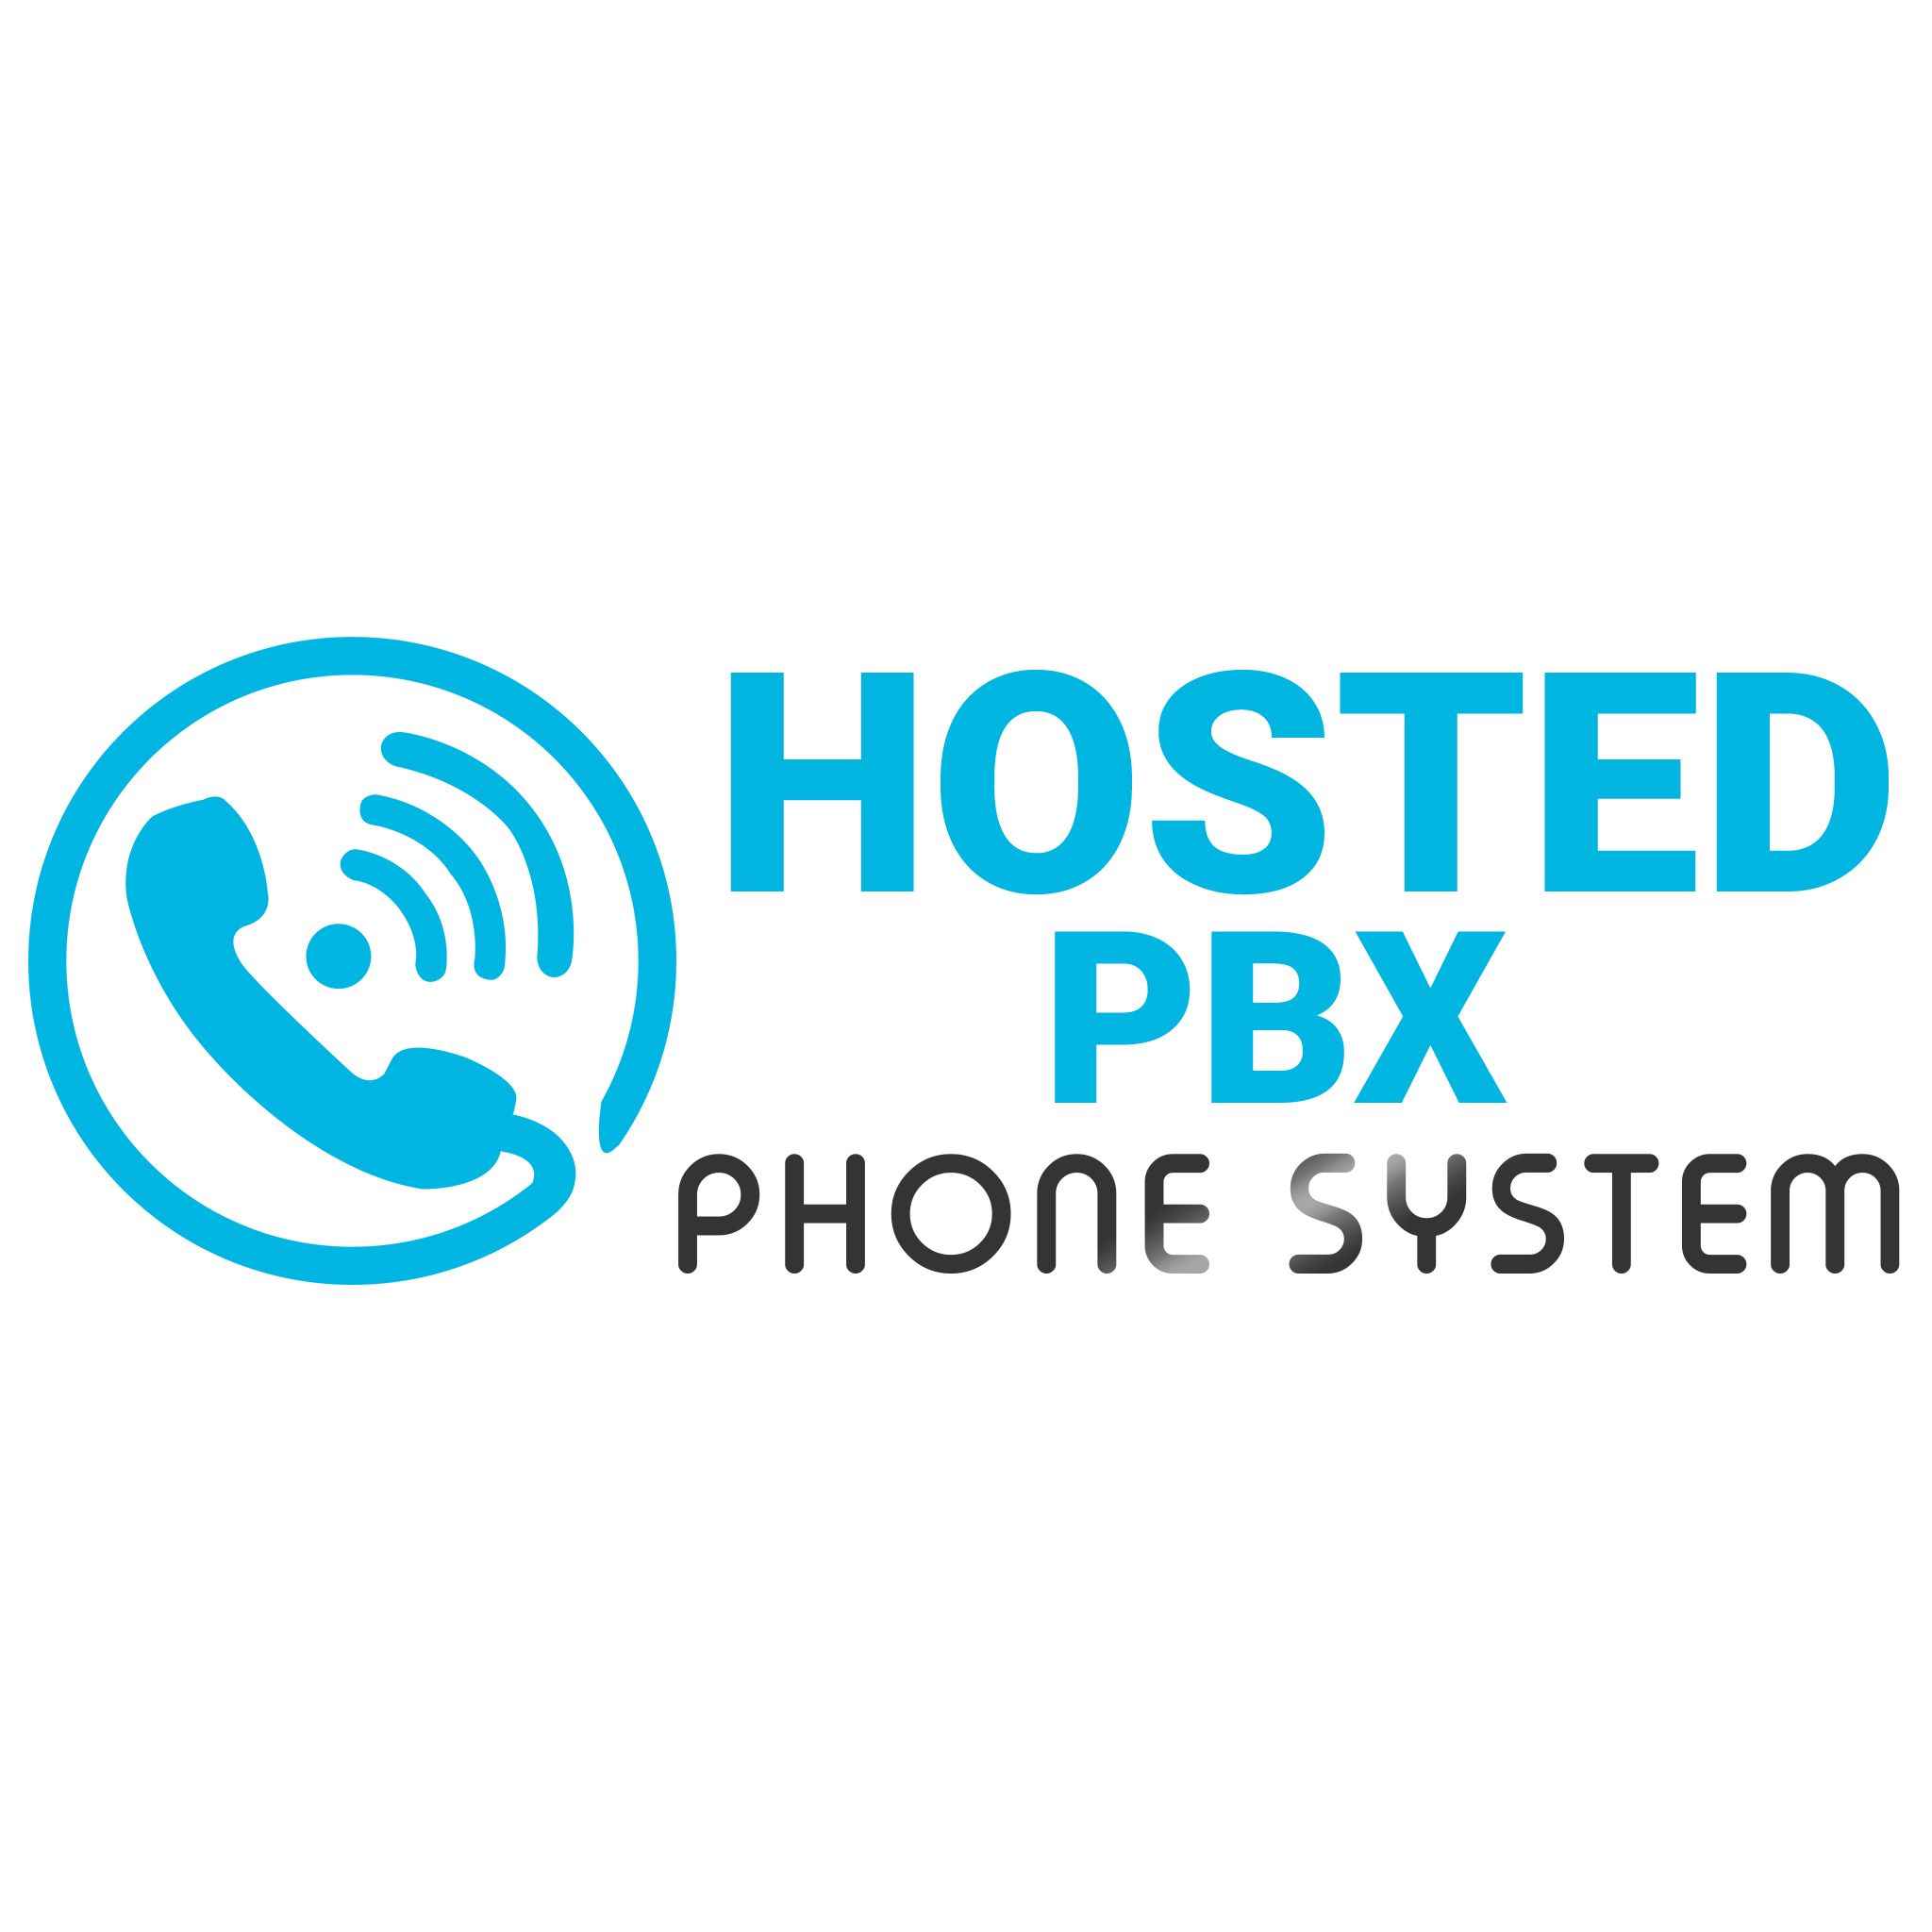 3CX Phone Systems